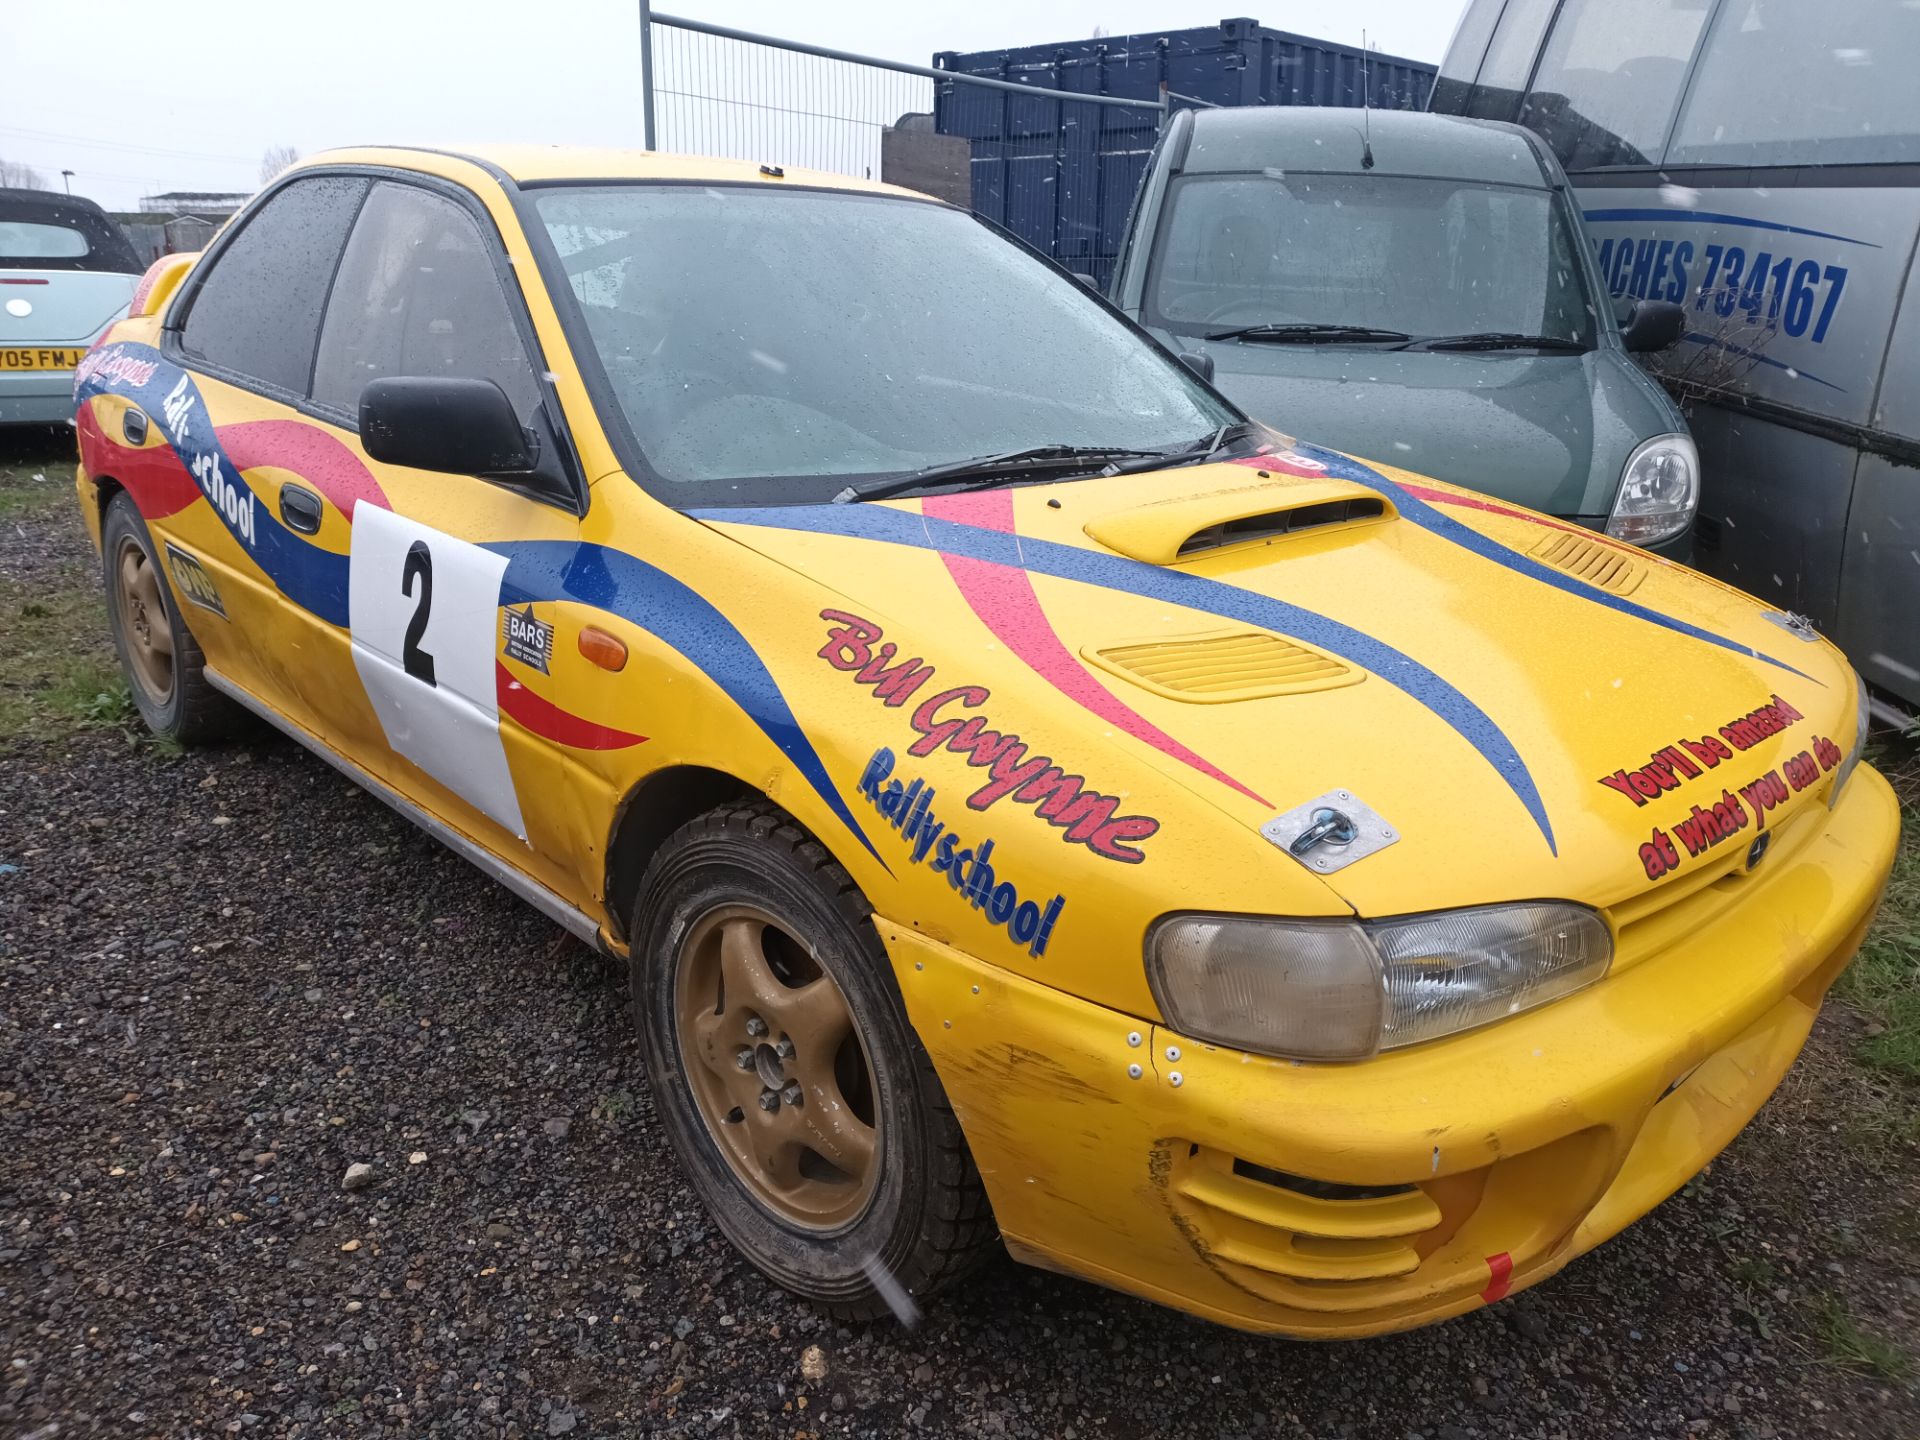 Subaru WRX Rally Modified car with fitted roll cage